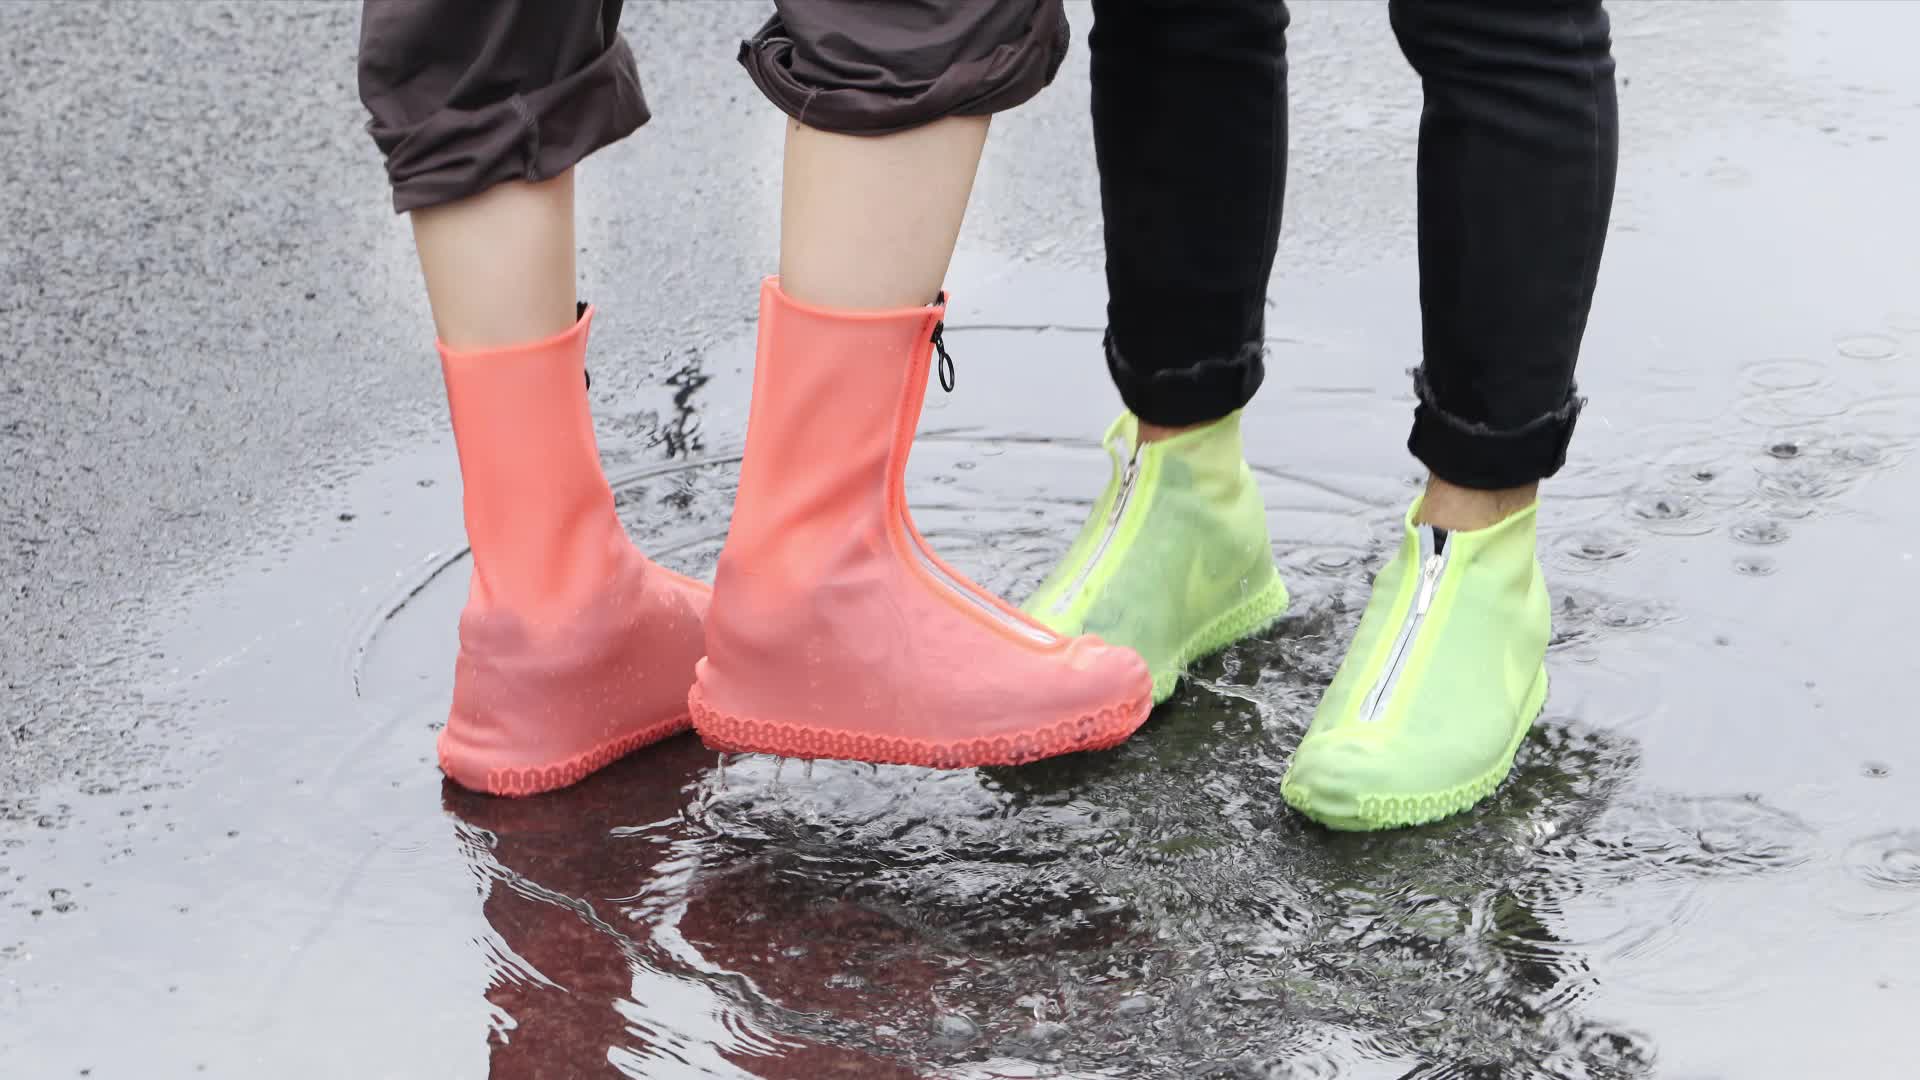 Silicone Water-resistant Shoes Cover Waterproof Rain Boots Rain Shoes Overshoes 